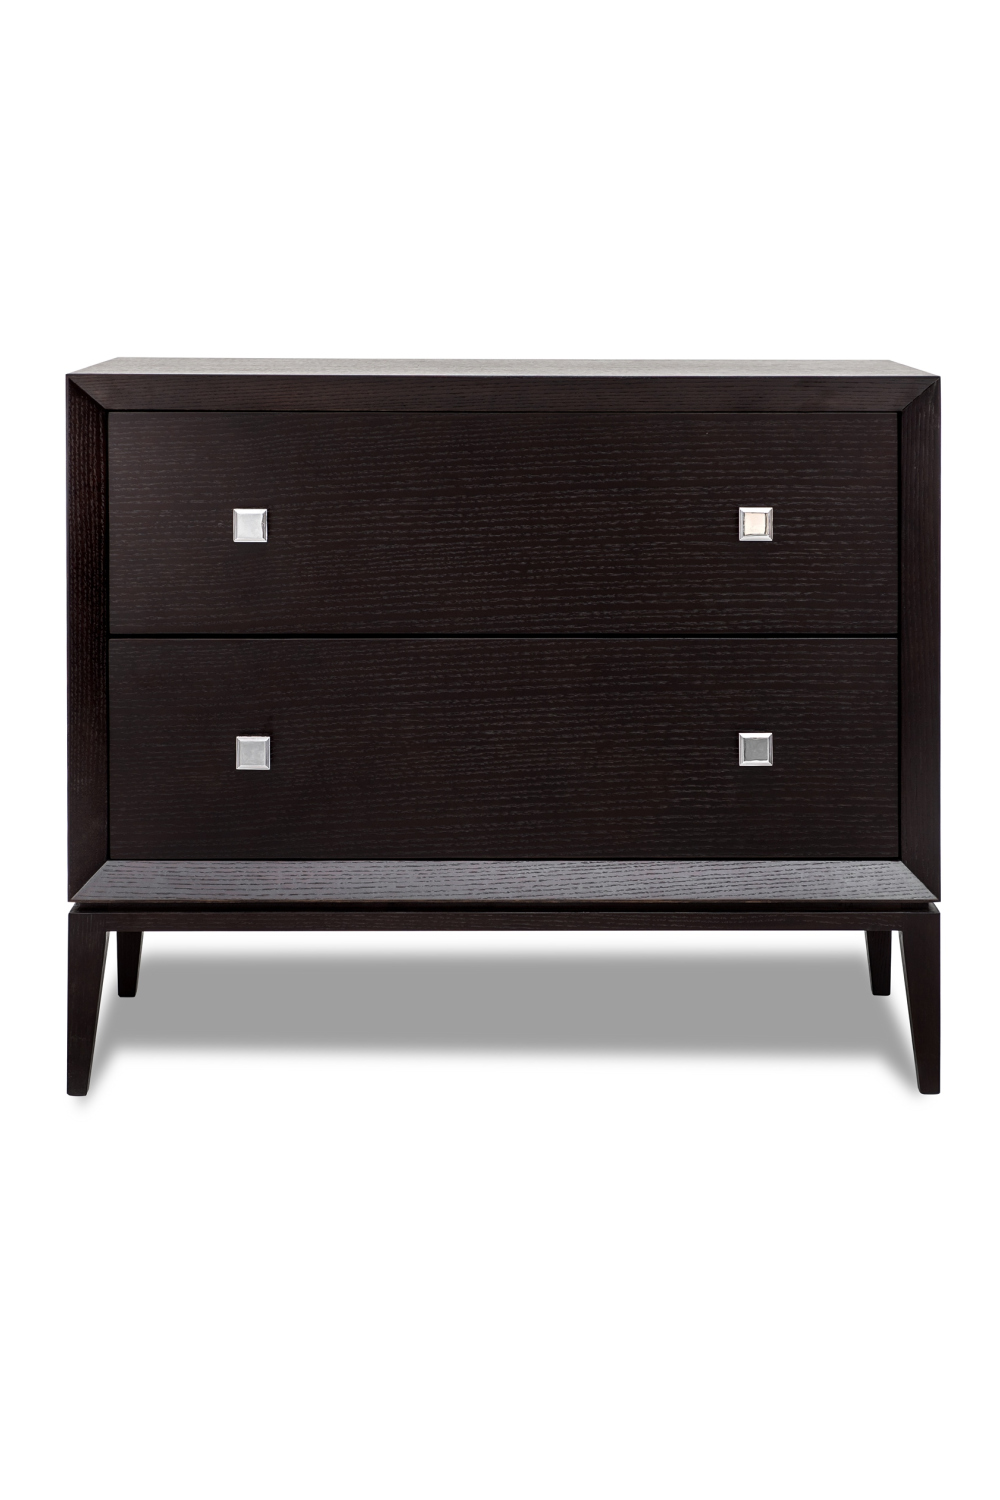 Black Wooden Chest of Drawers | Liang & Eimil Ella | OROA.com